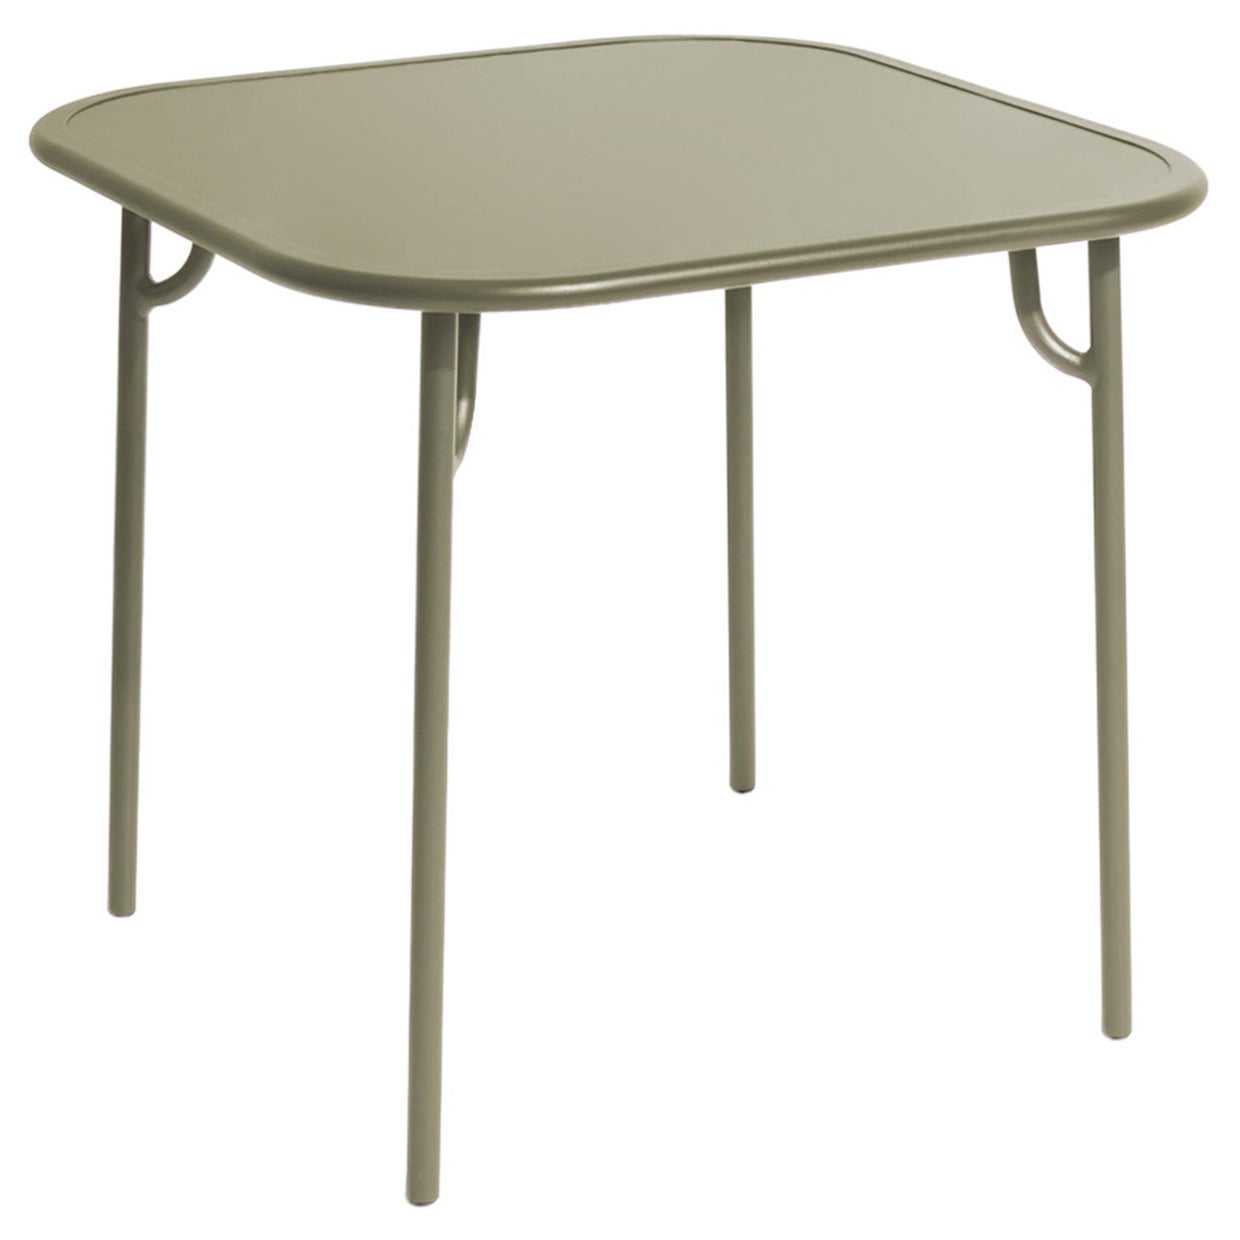 Petite Friture Week-End Plain Square Dining Table in Jade Green Aluminium, 2017 For Sale